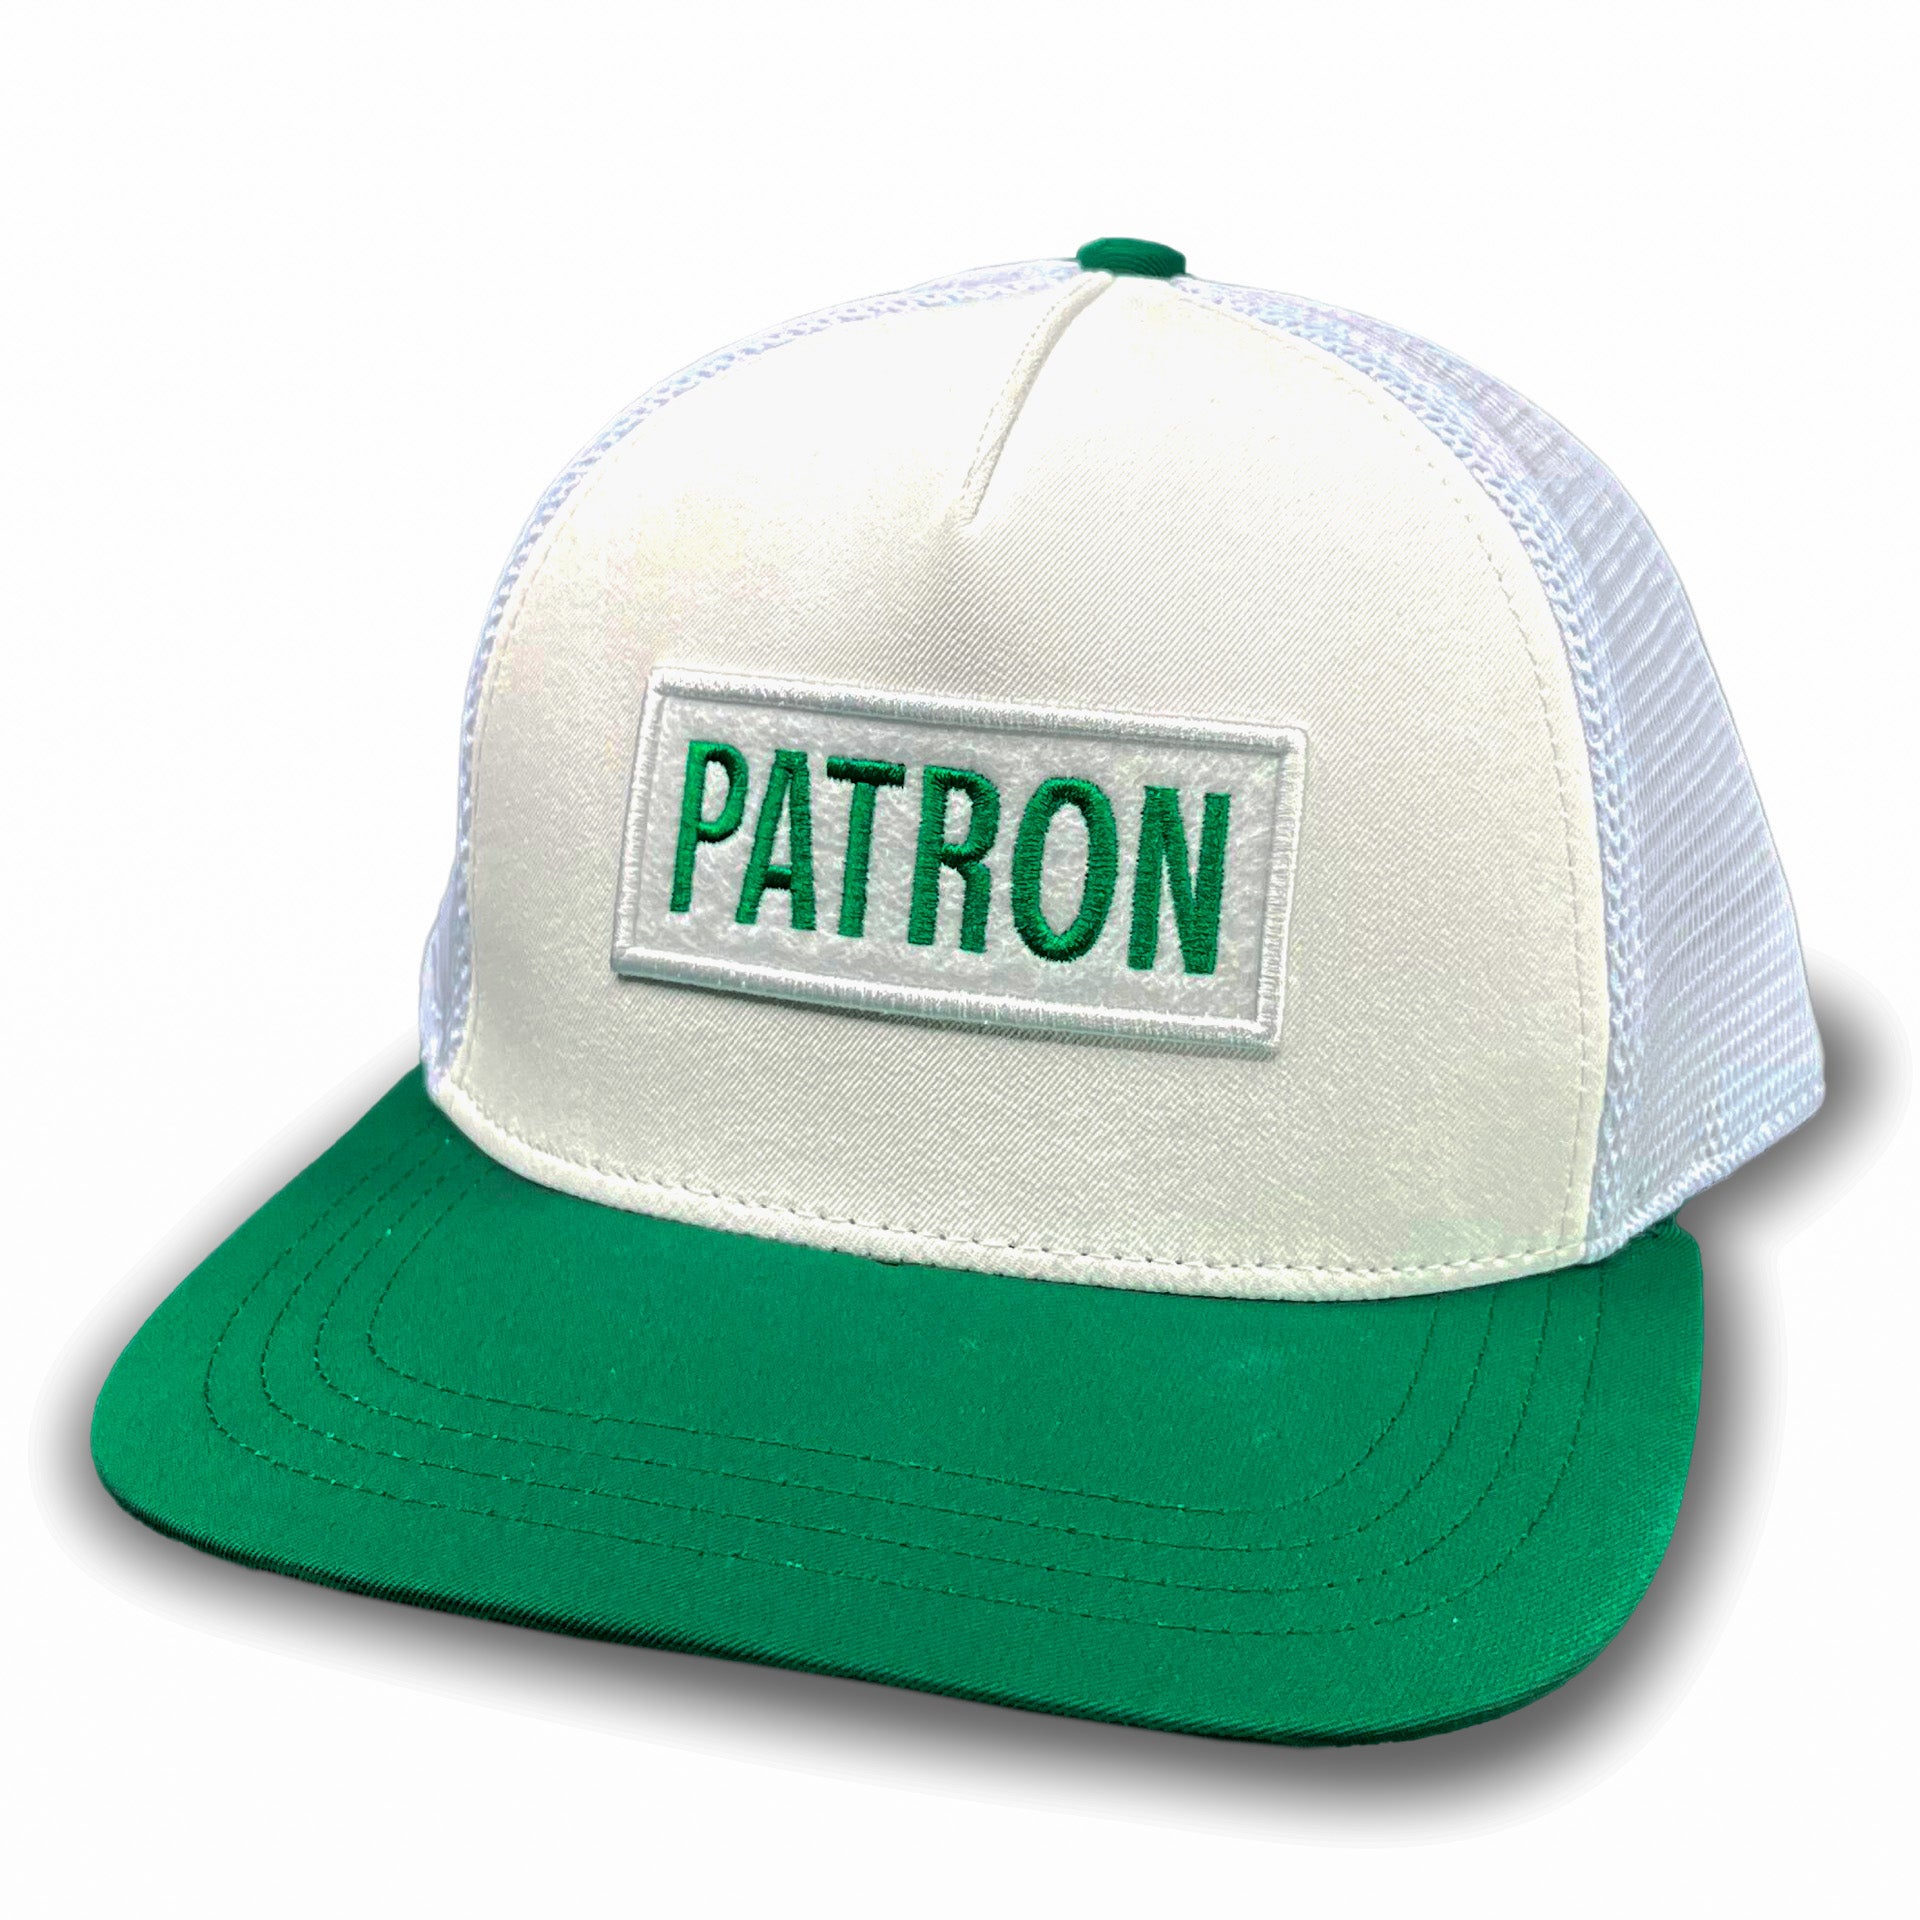 "The Patron" Snap-Back